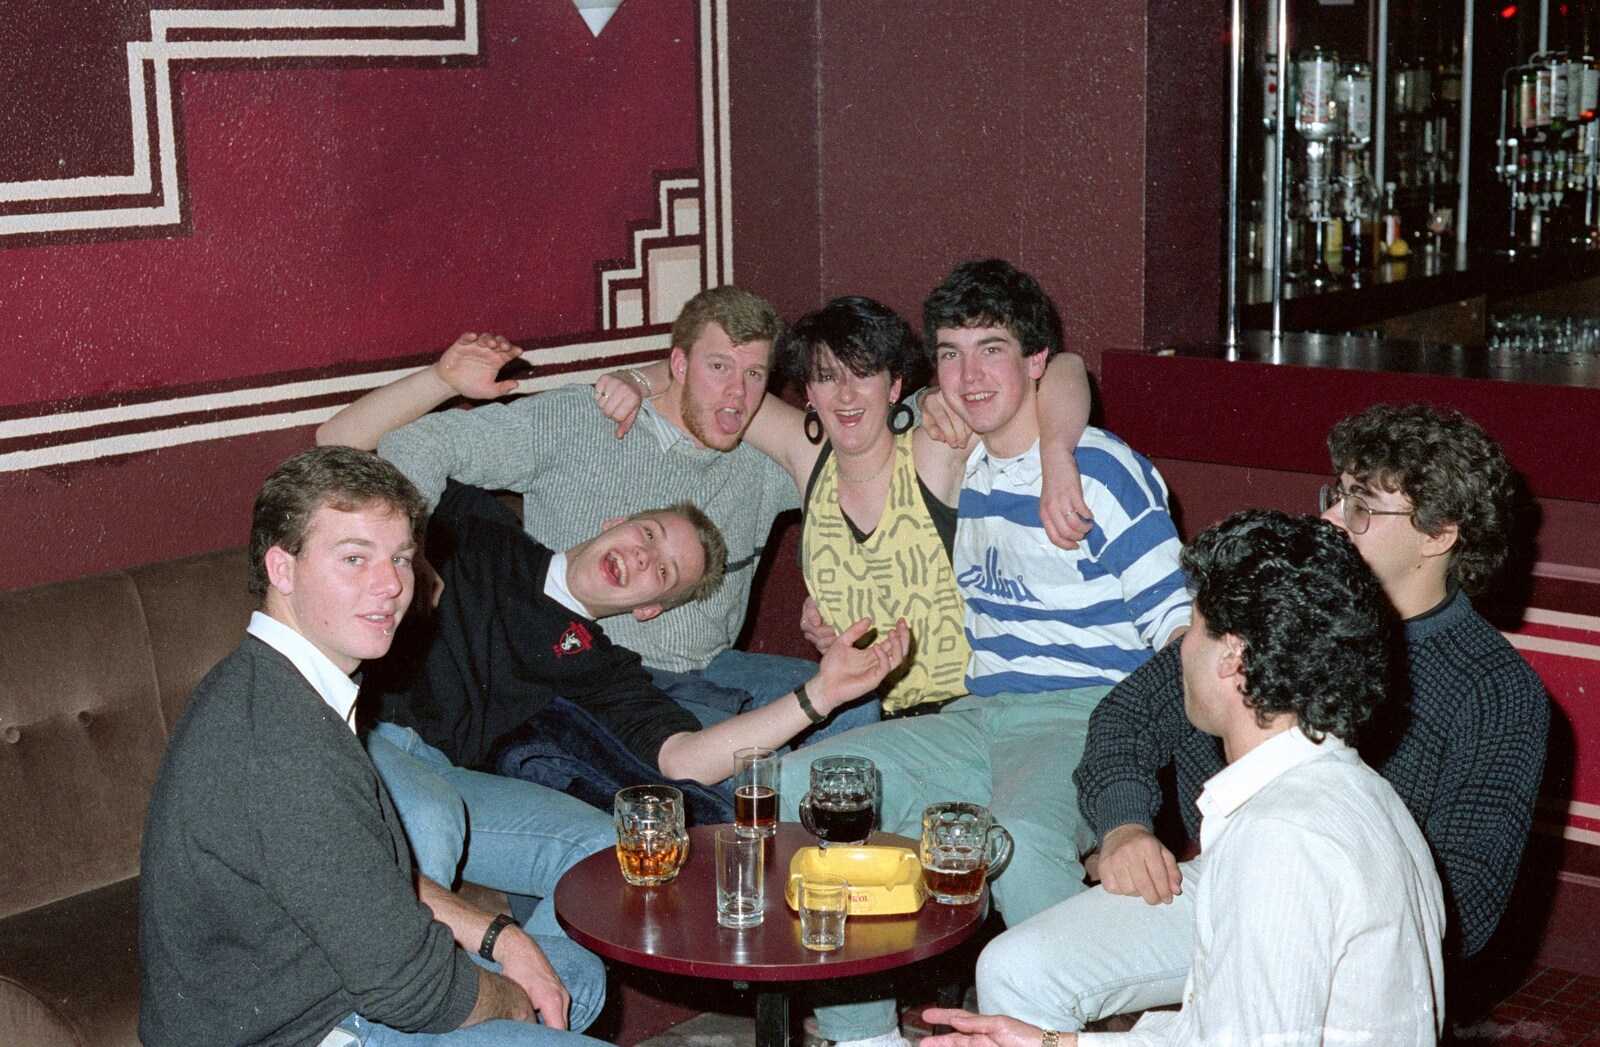 Another table of students from Uni: A Party in Snobs Nightclub, Mayflower Street, Plymouth - 18th October 1986